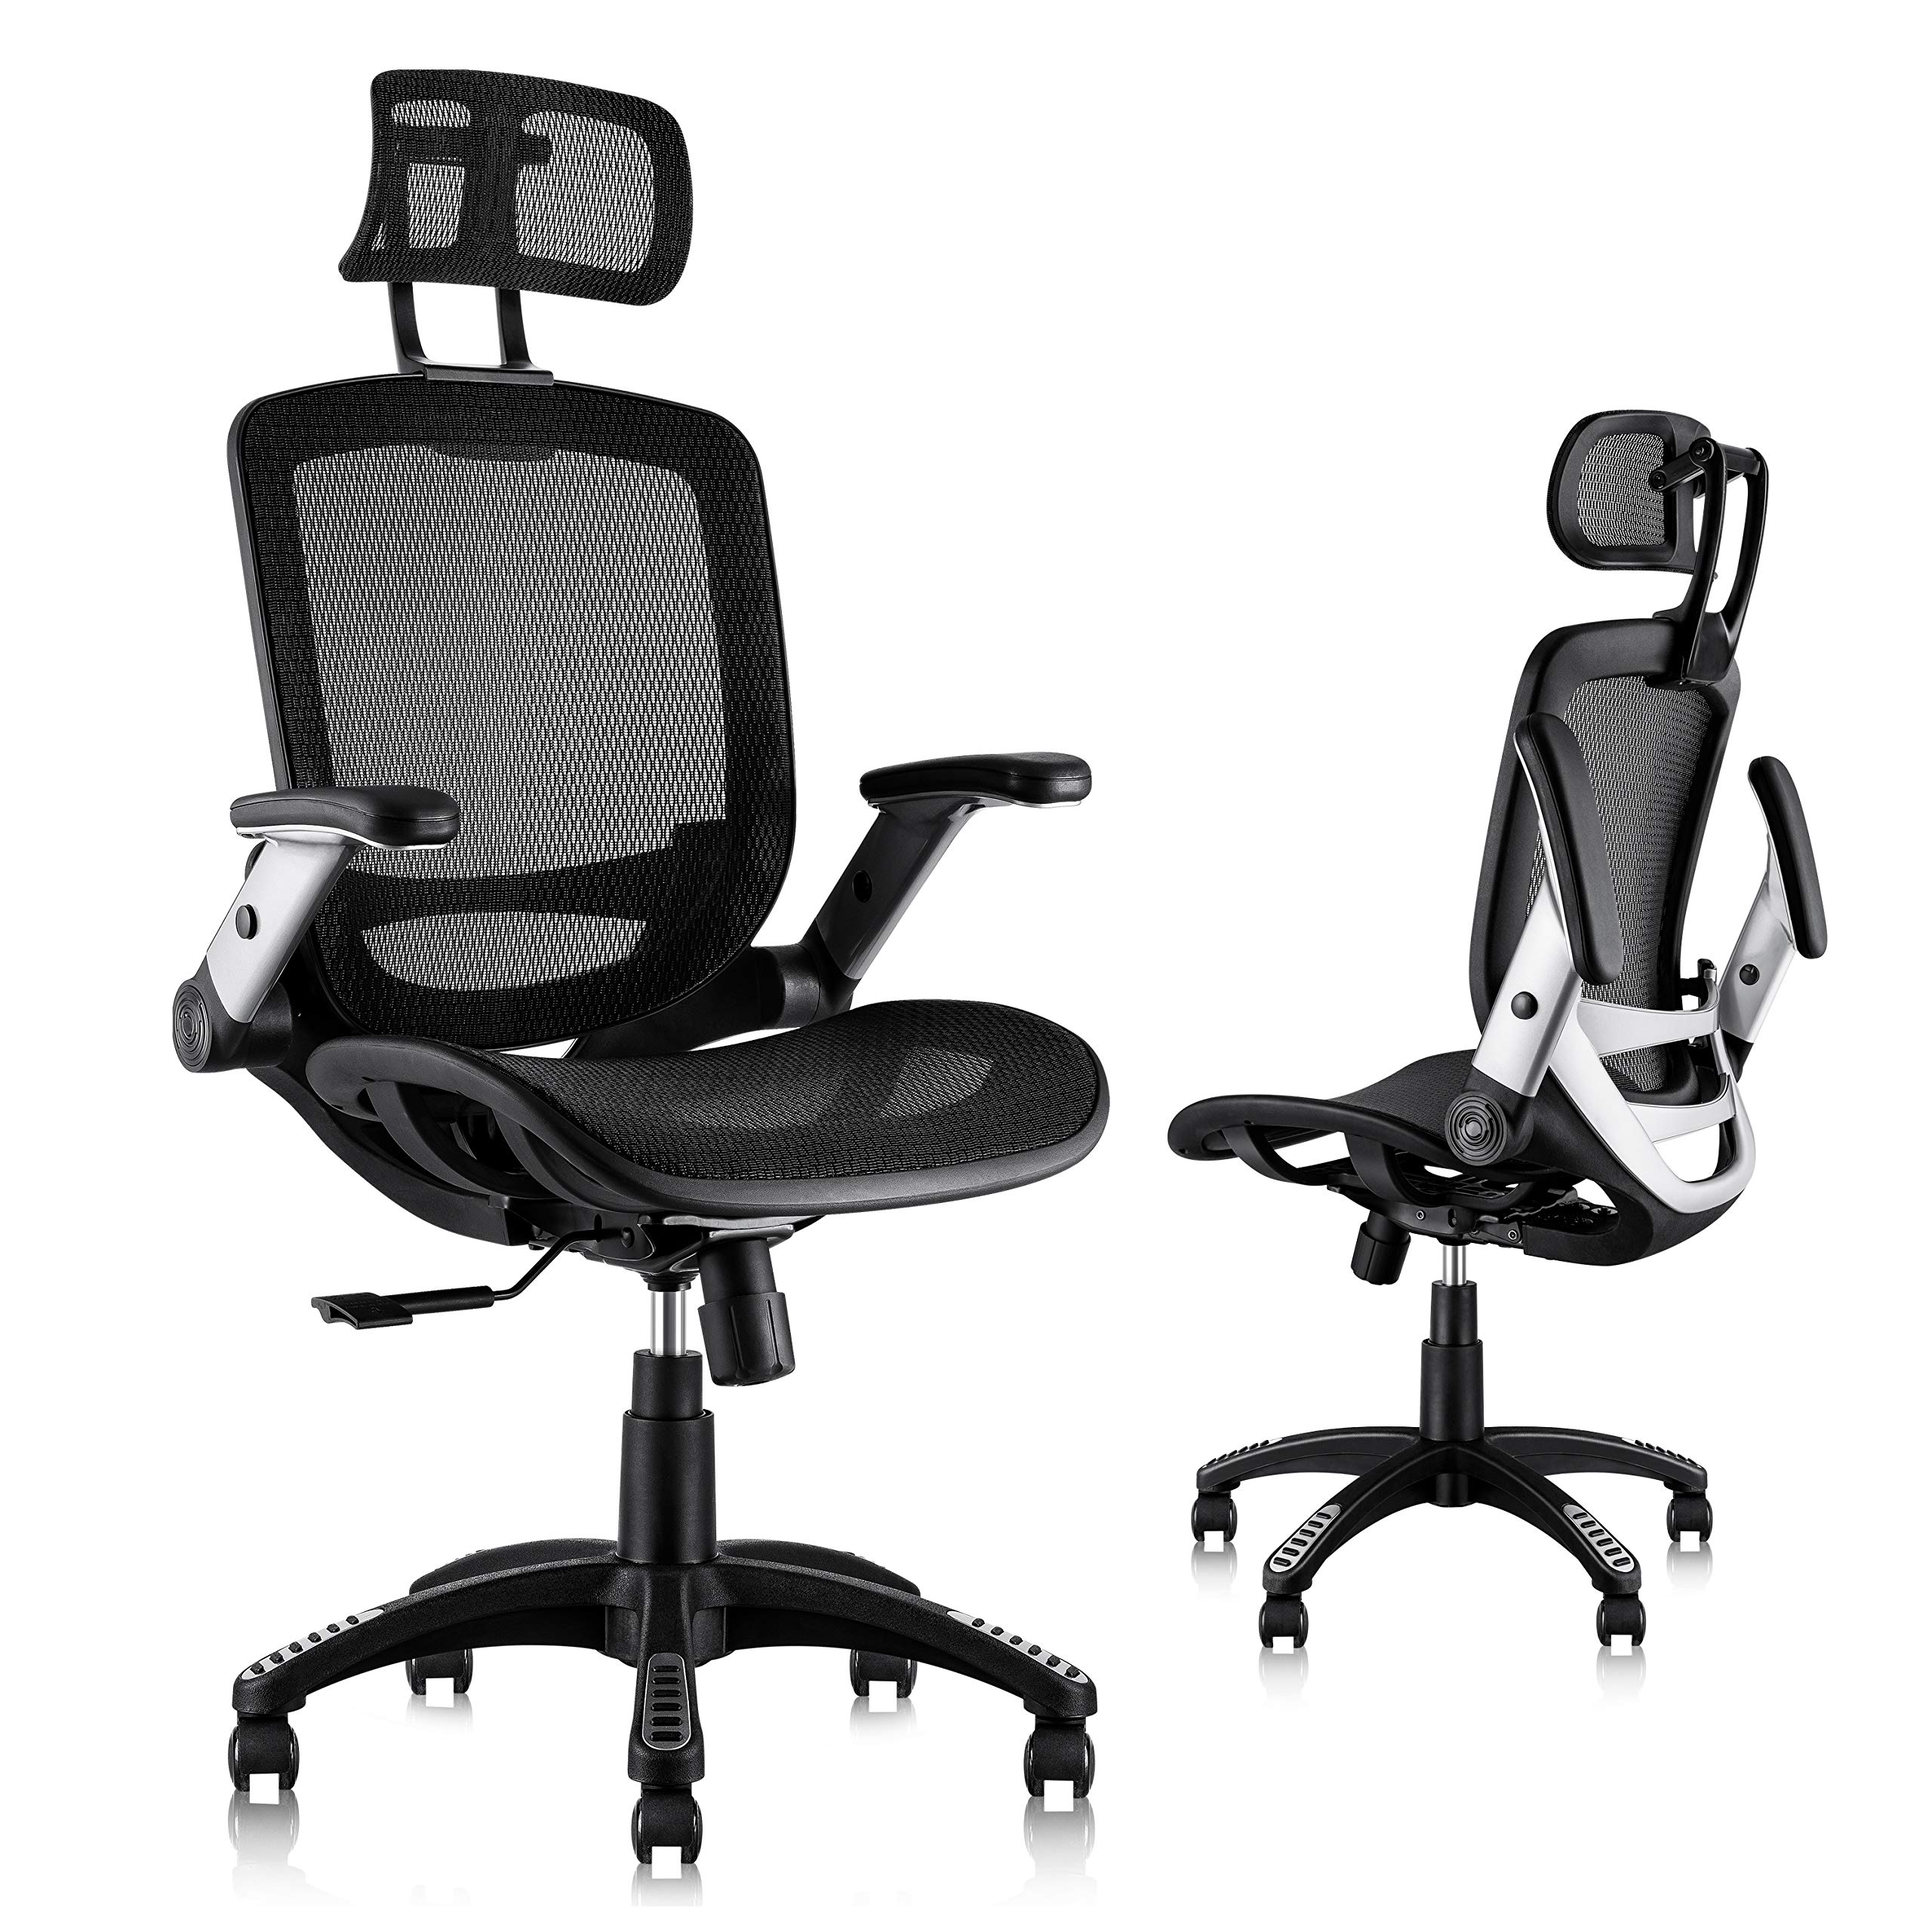 Find Your Perfect Chair: Top 5 Ergonomic Picks for Long Work Hours